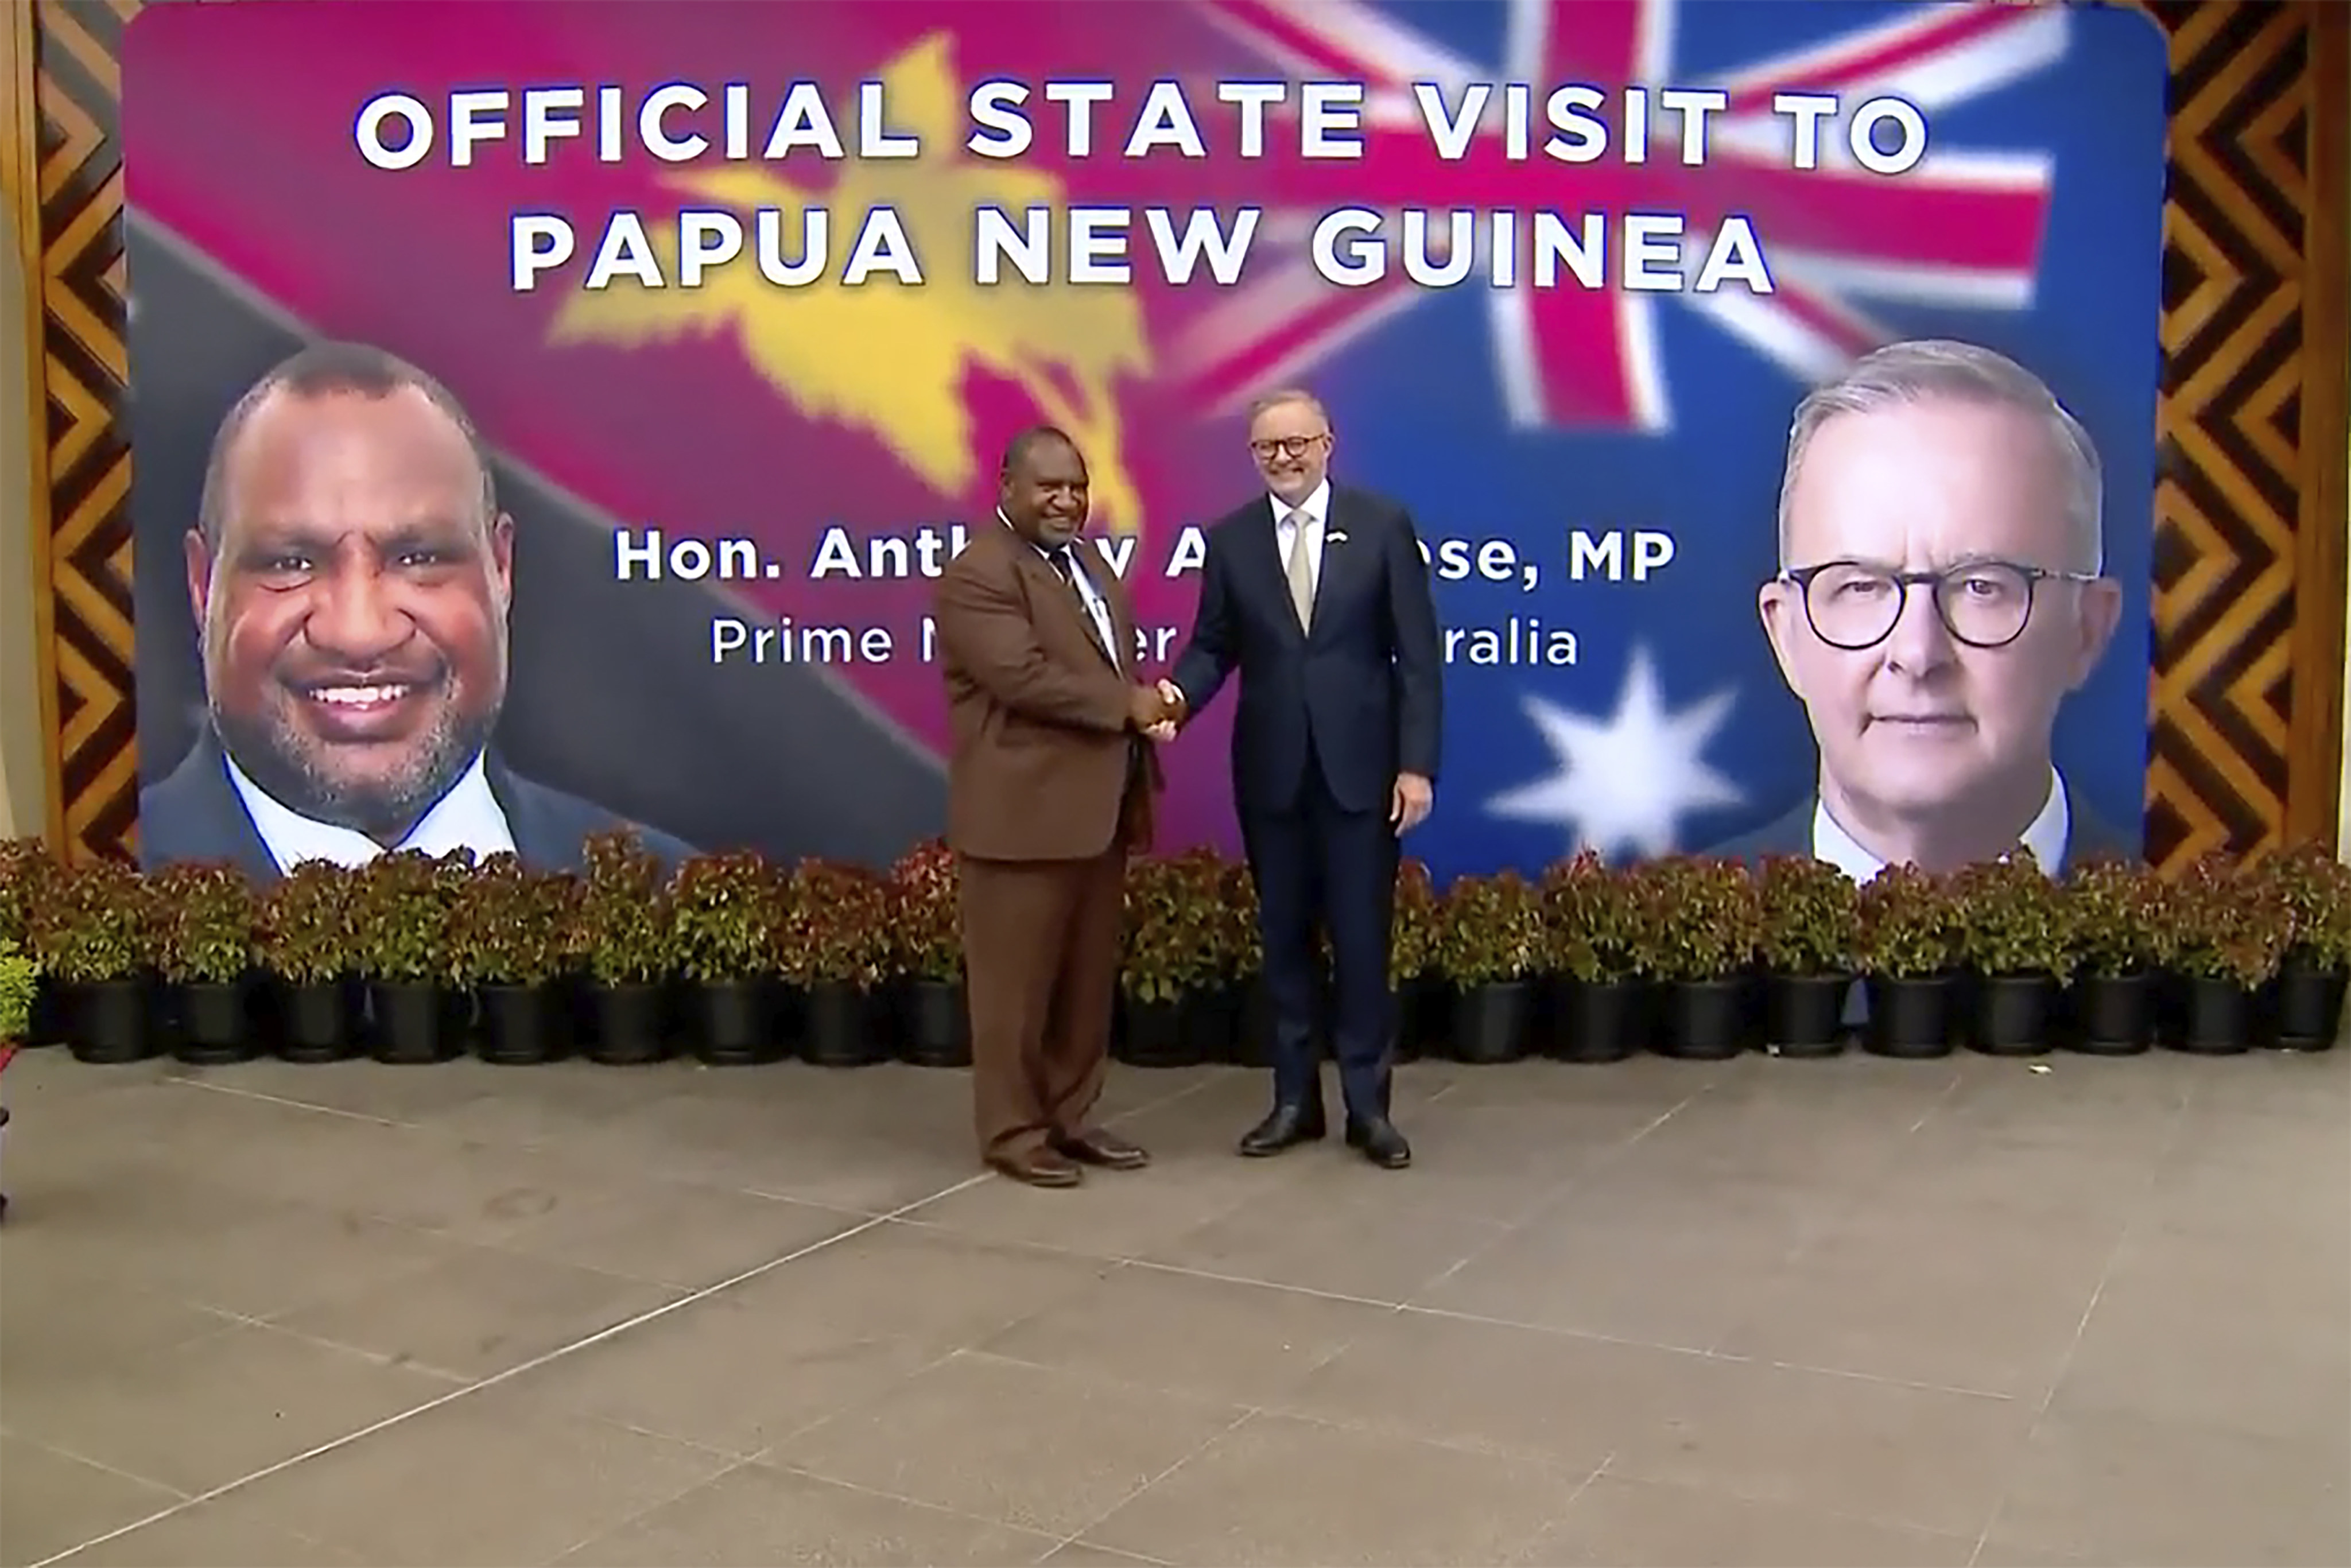 Australian Prime Minister Anthony Albanese, left, and Papua New Guinea’s Prime Minister James Marape shake hands outside the parliament in Port Moresby, Papua New Guinea on January 12, 2023. Photo: via AP